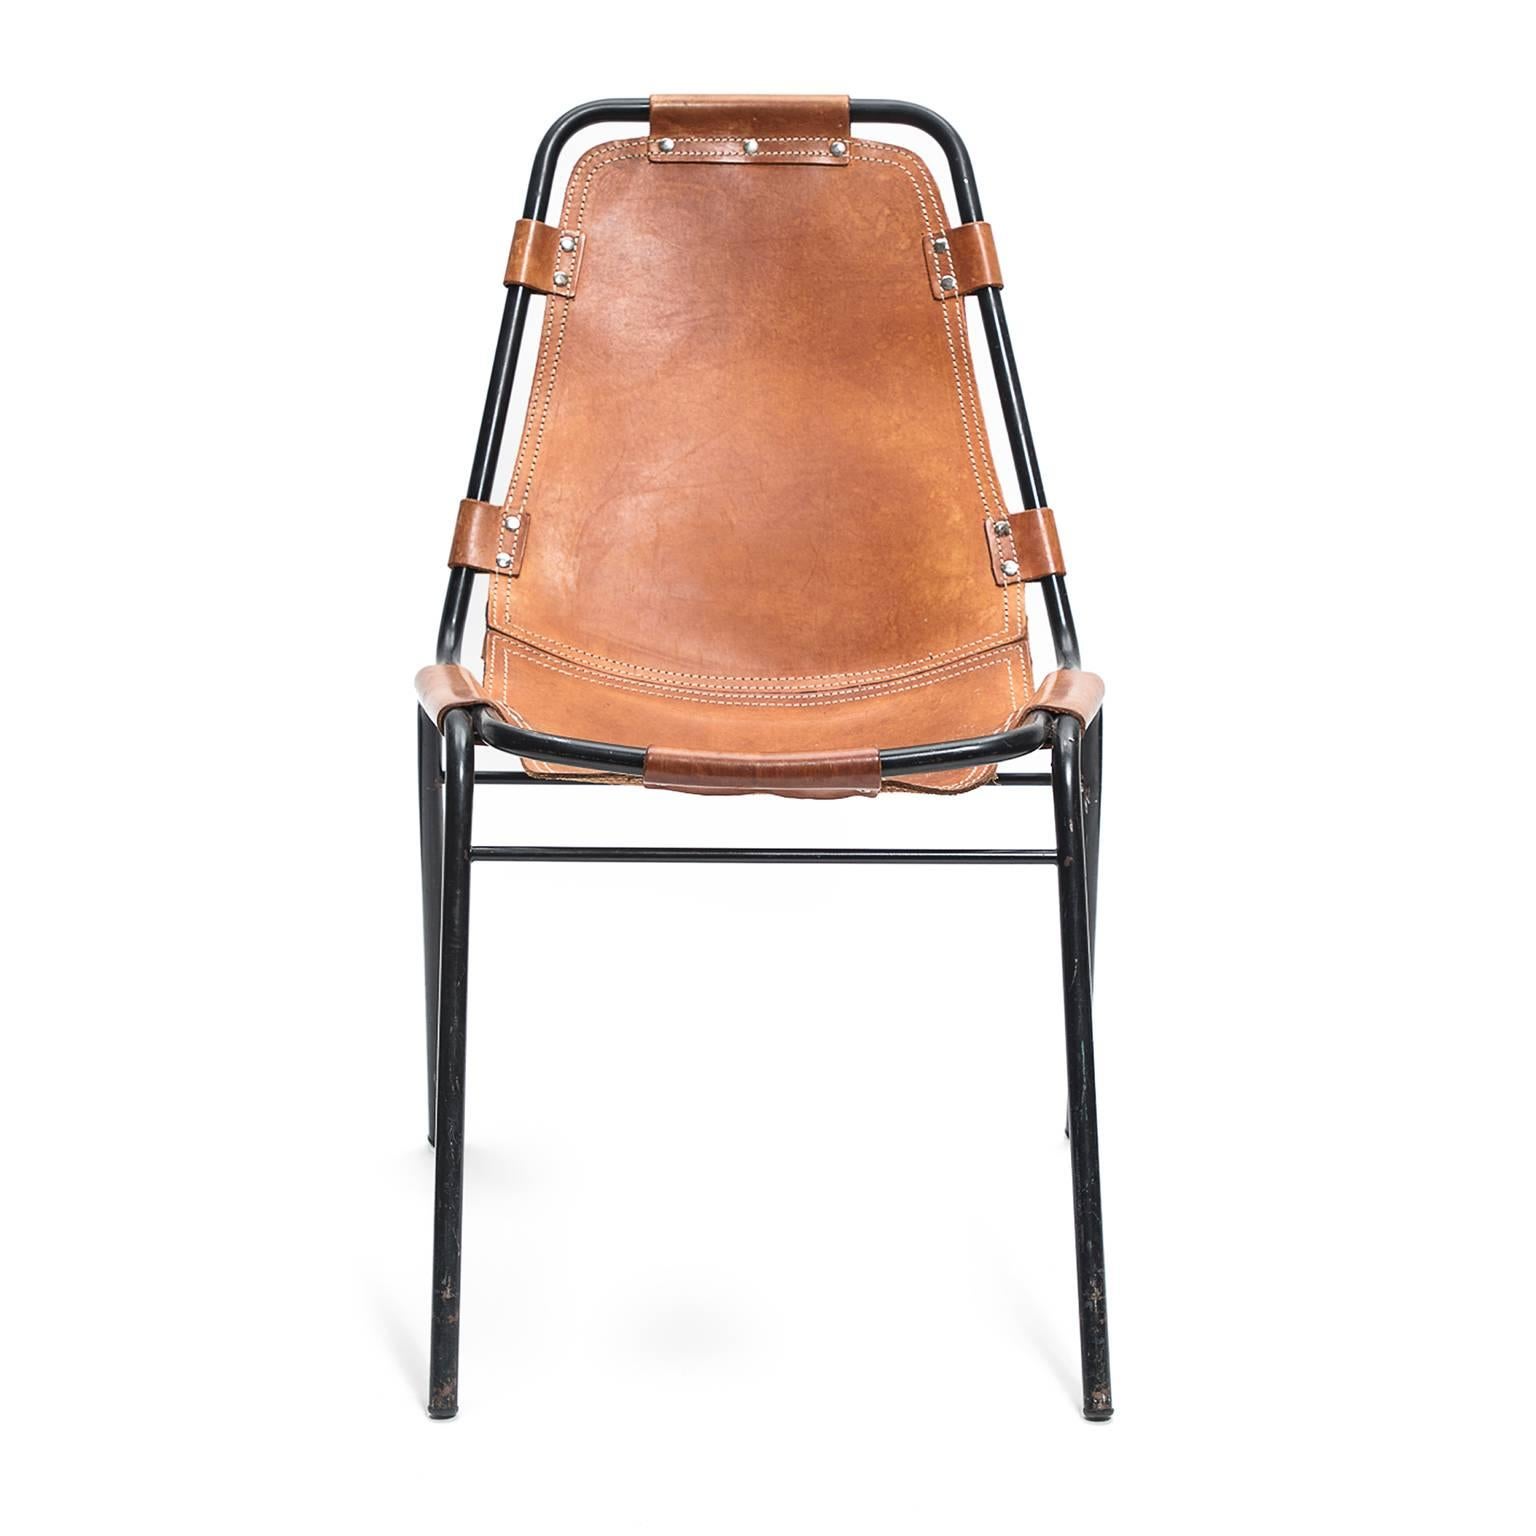 Designed by Charlotte Perriand for the Les Arcs ski resort in Switzerland, this chair features leather sling seats on tubular black metal frames. In her 1929 manifesto, wood or metal, Perriand wrote 